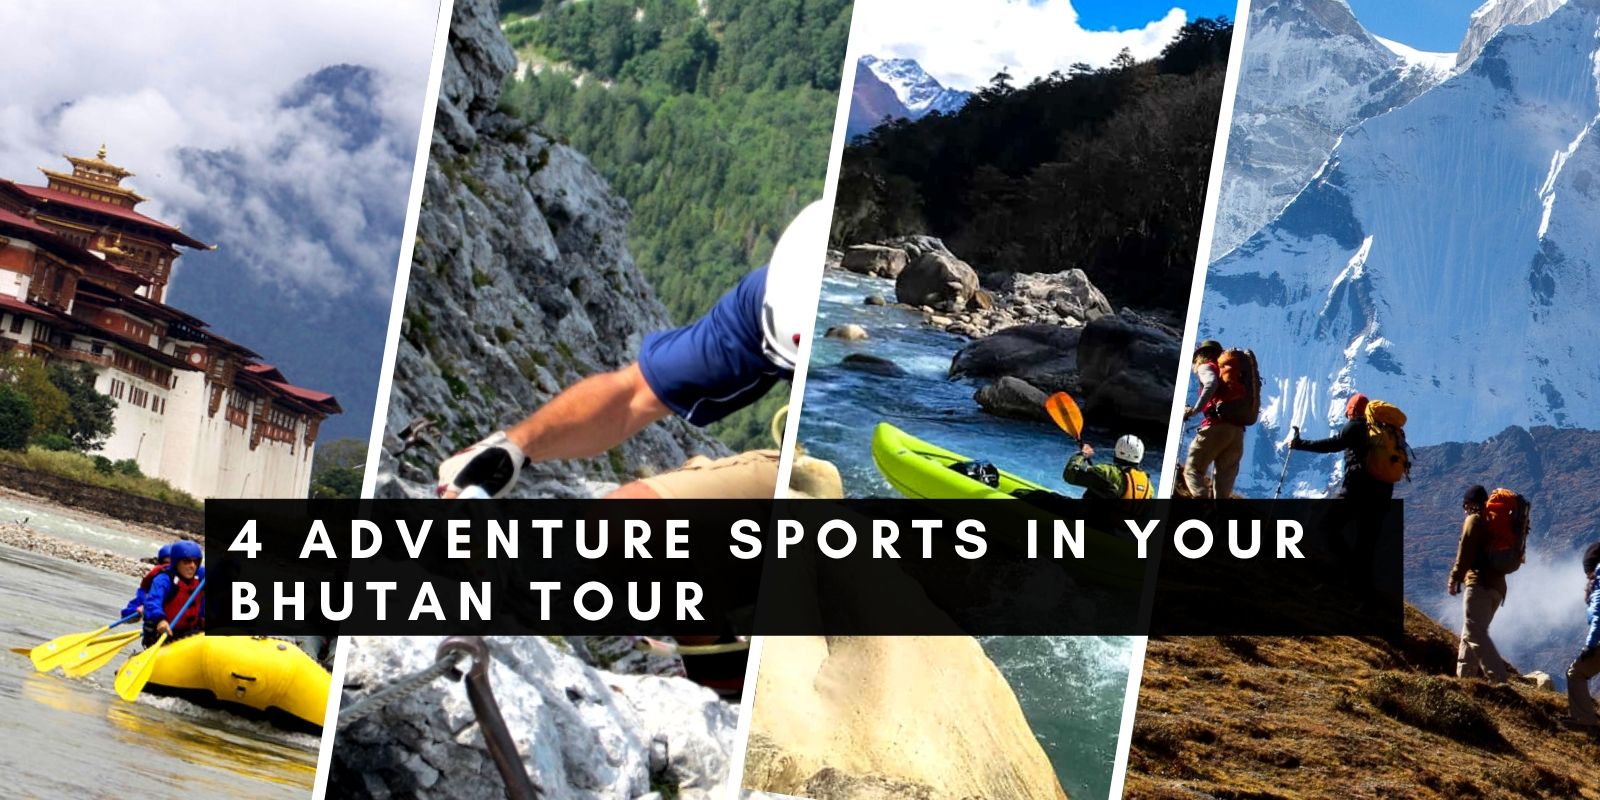 4 Adventure Sports You Can Include In Your Bhutan Tour Packages